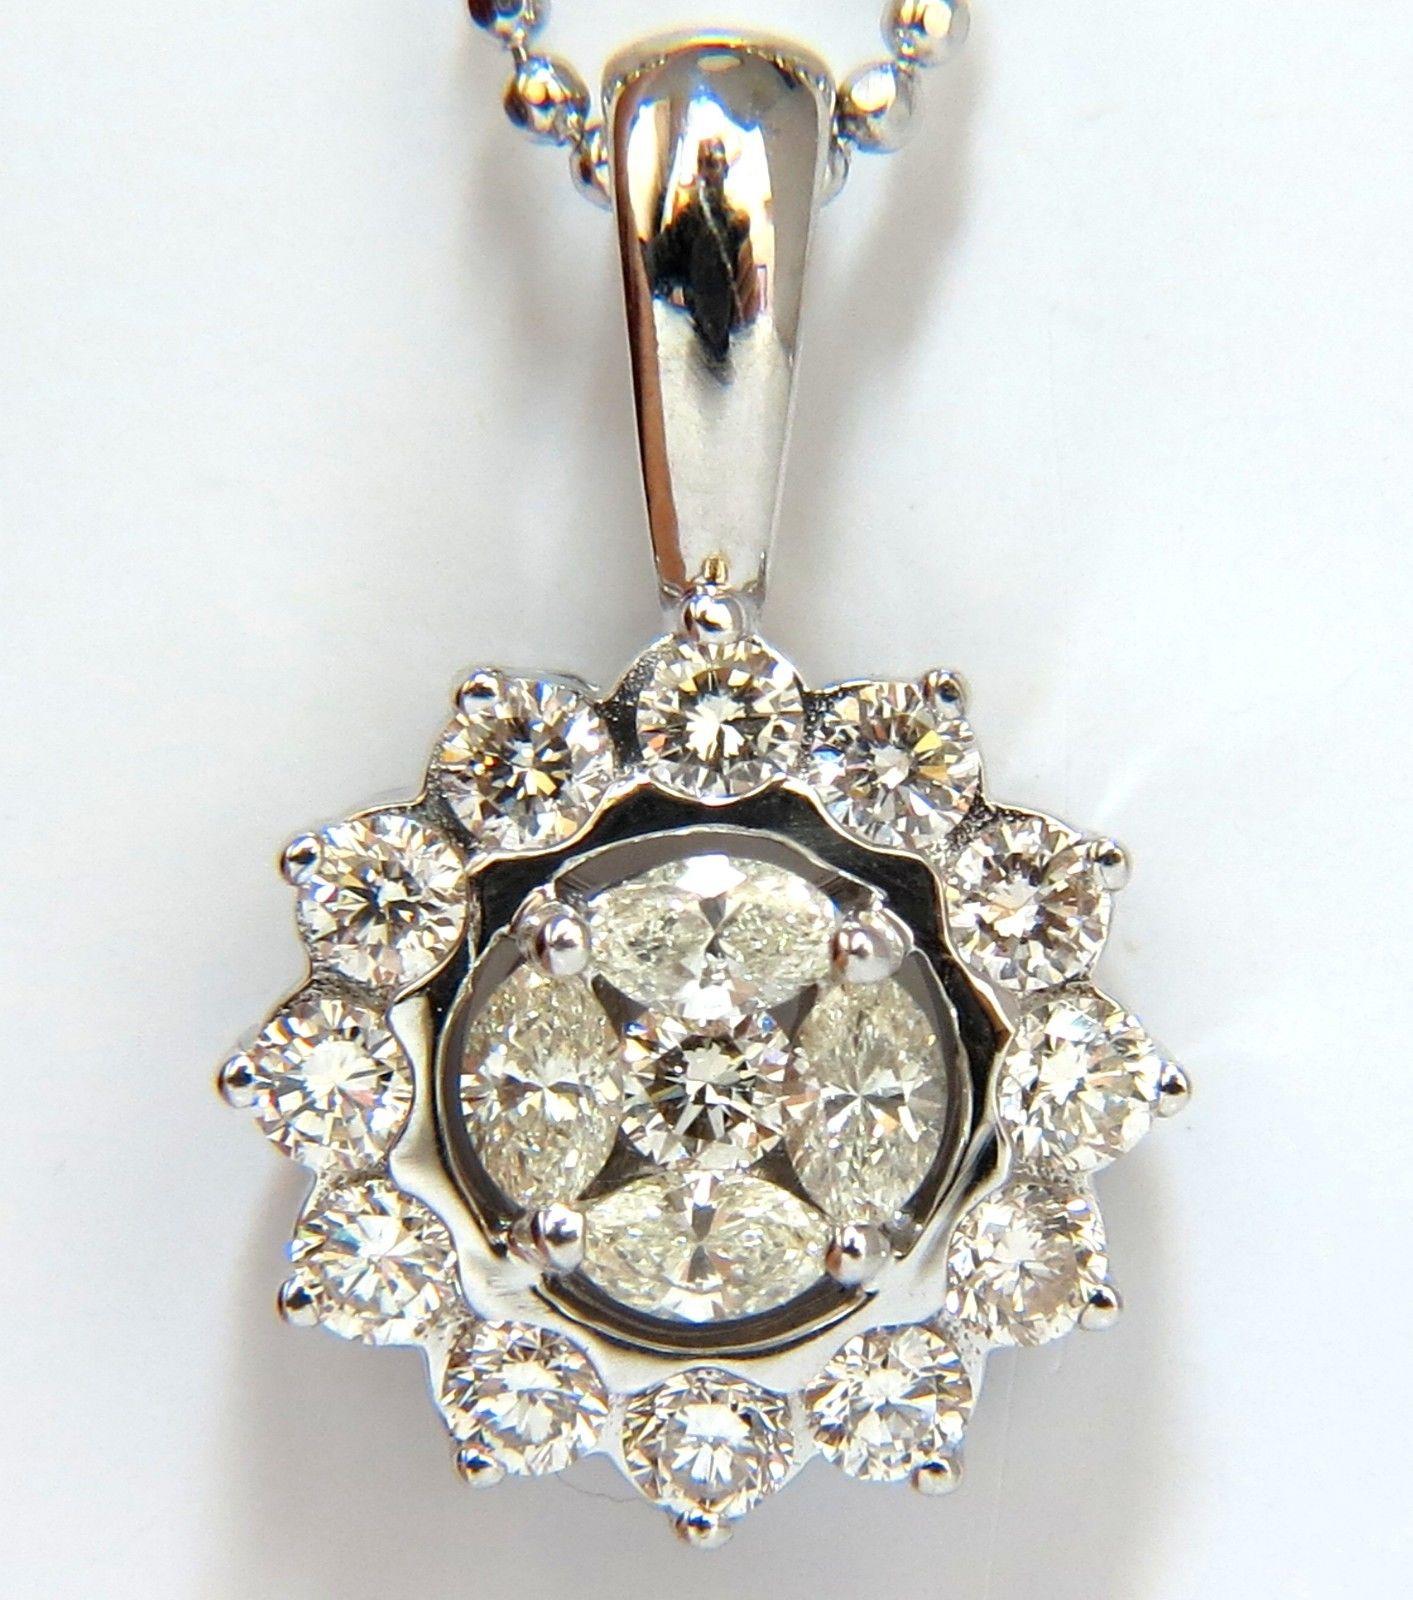 Marquise cluster Halo pendant & Chain



1.00ct. Natural round & marquise diamonds 

 Full cut brilliants.

 Vs-2 & Si-1 Clarity. 

(4)  Marquise: J-color

All rounds: G-colors.

Gorgeous halo design.

14kt. white gold

5.7 grams.

Pendant: .80 Inch